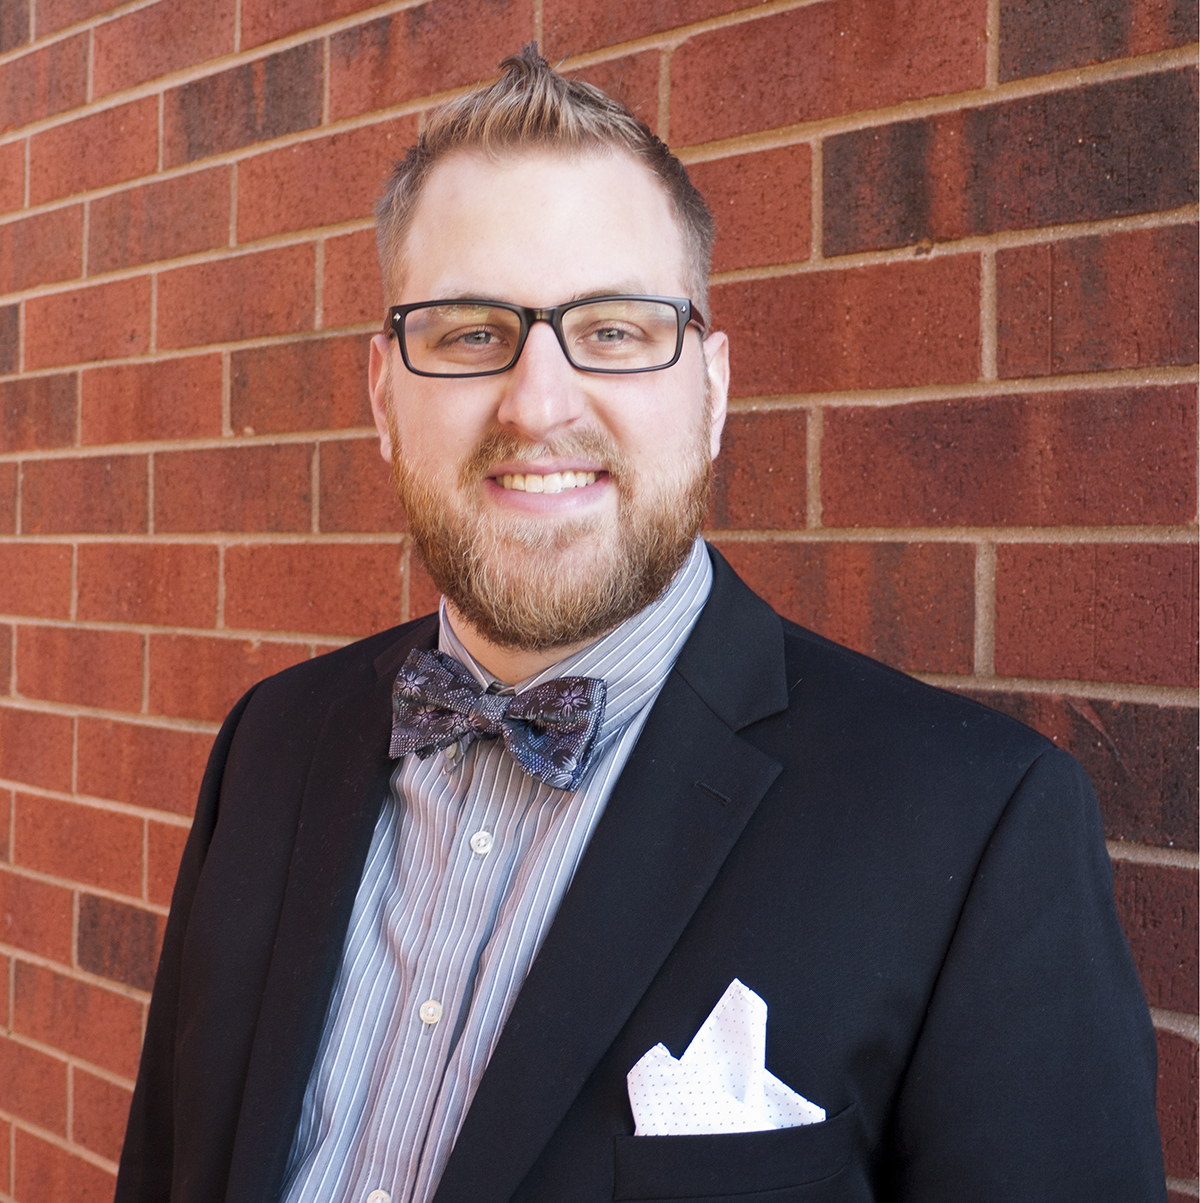 a headshot of Chad O'Brien, a young white man with a beard, wearing glasses, and dressed in a suit and bowtie.